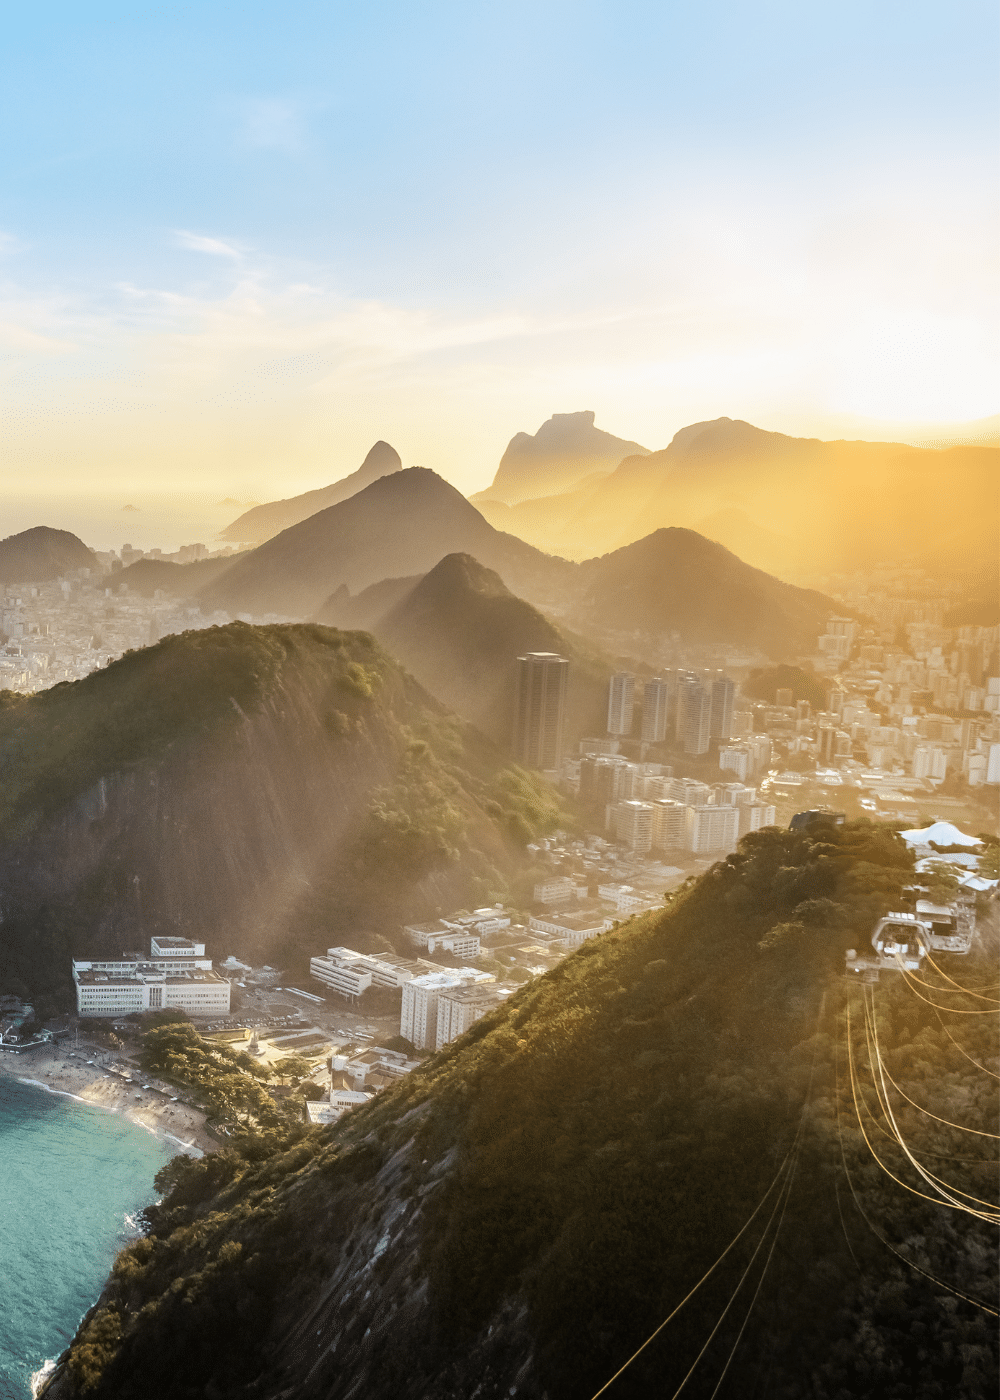 Do I need a visa for Brazil from the UK? - mountains